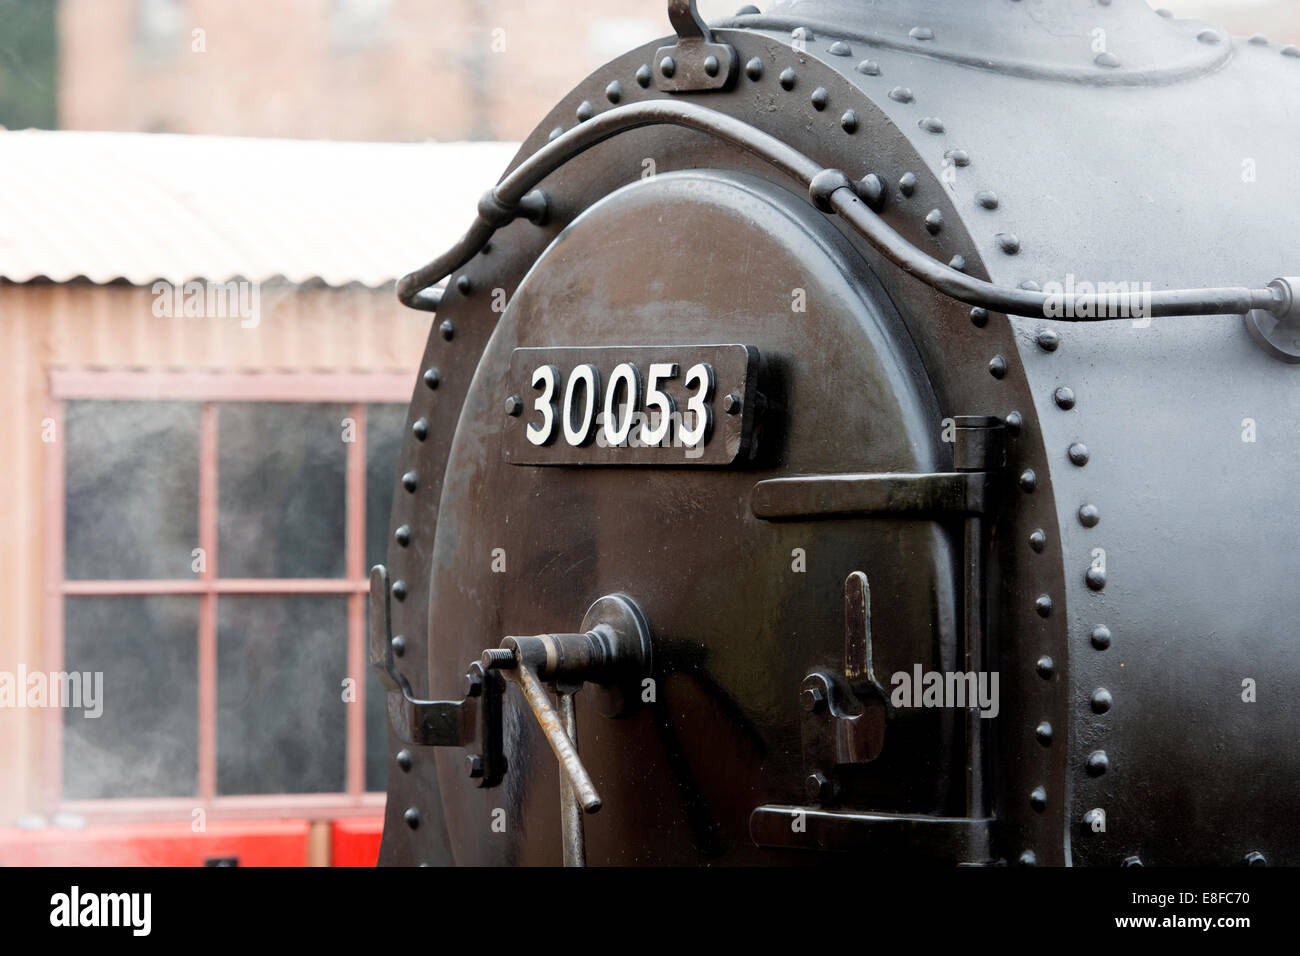 LSWR M7 class steam locomotive No. 30053 on the Severn Valley Railway at Kidderminster station, Worcestershire, UK Stock Photo